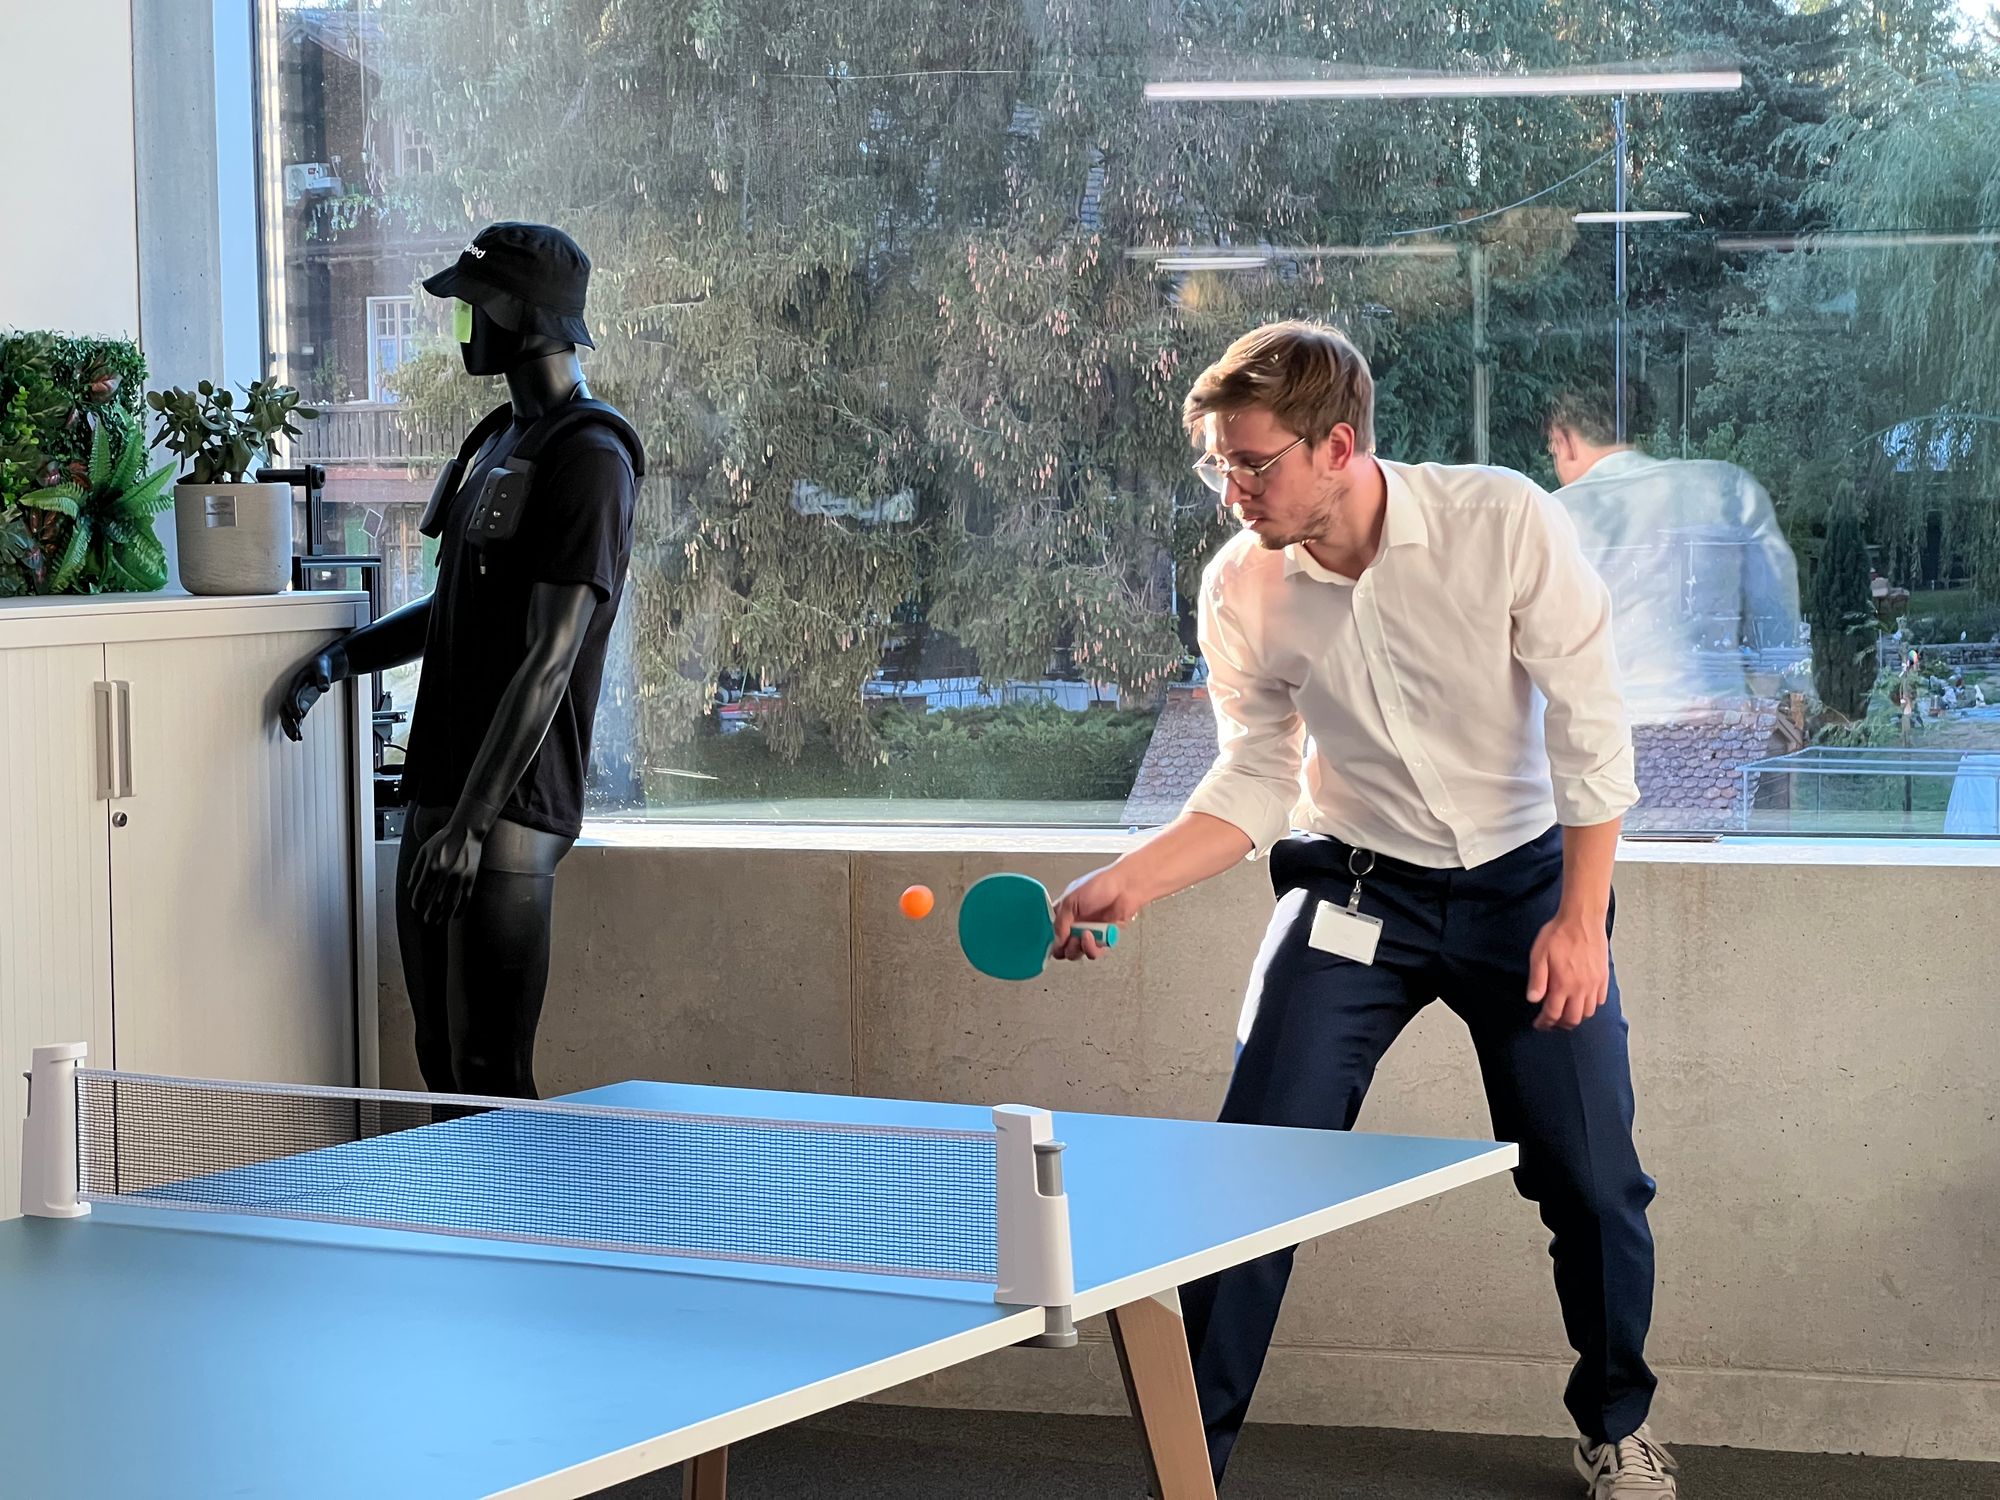 OK, we’re still a startup, we ordered a ping pong table. We also use it for meetings from time to time.